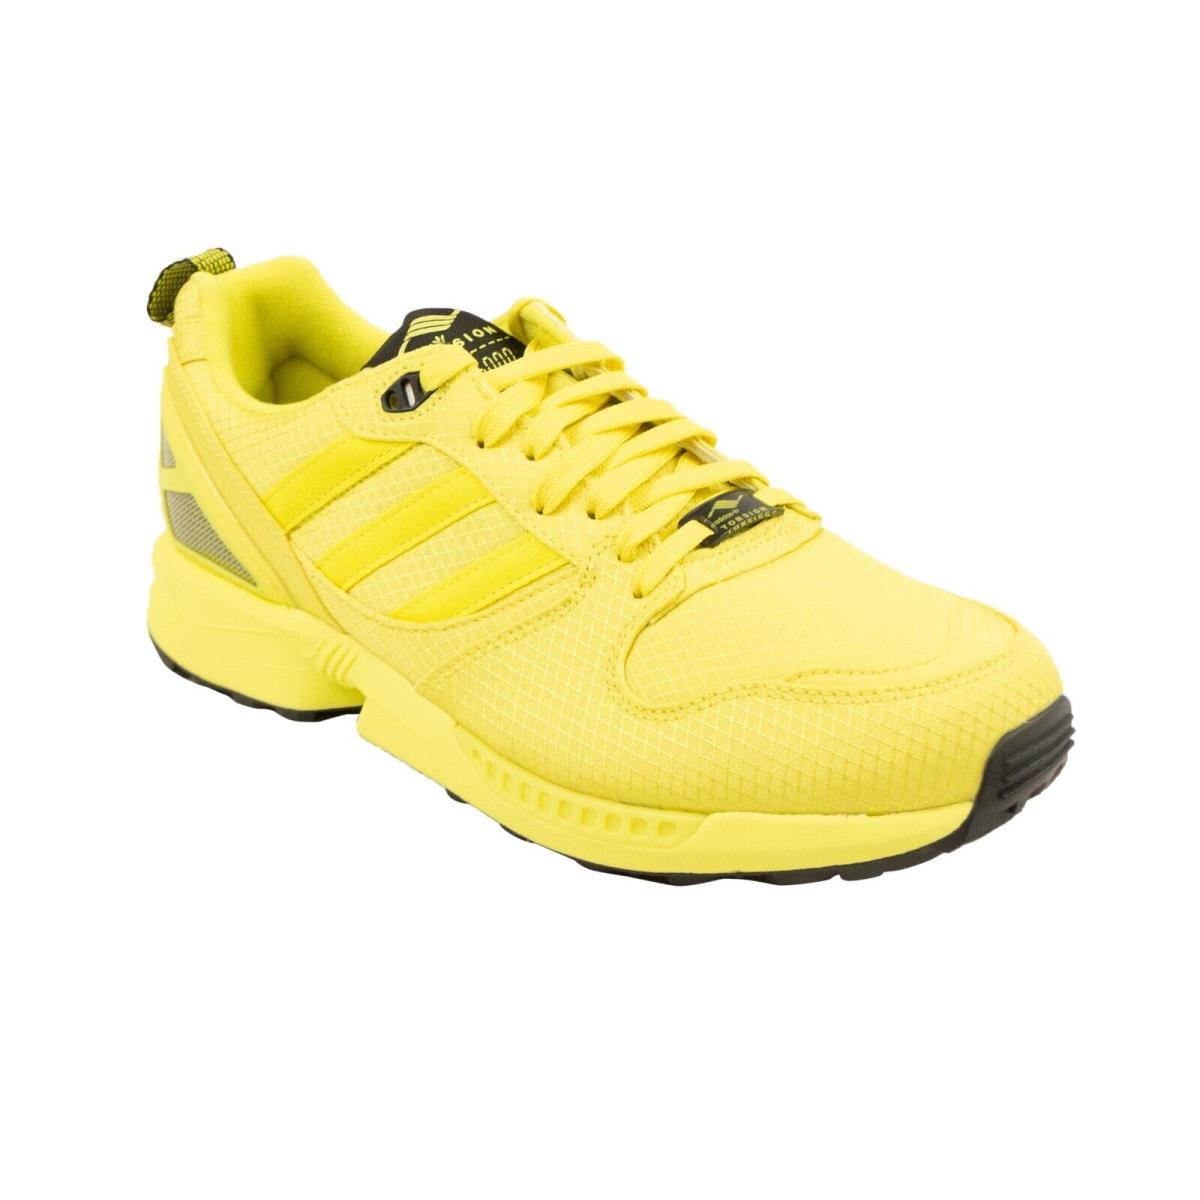 Adidas Yellow ZX 5000 `a-zx Series - Torsion` Sneakers Size 11/44 - Yellow